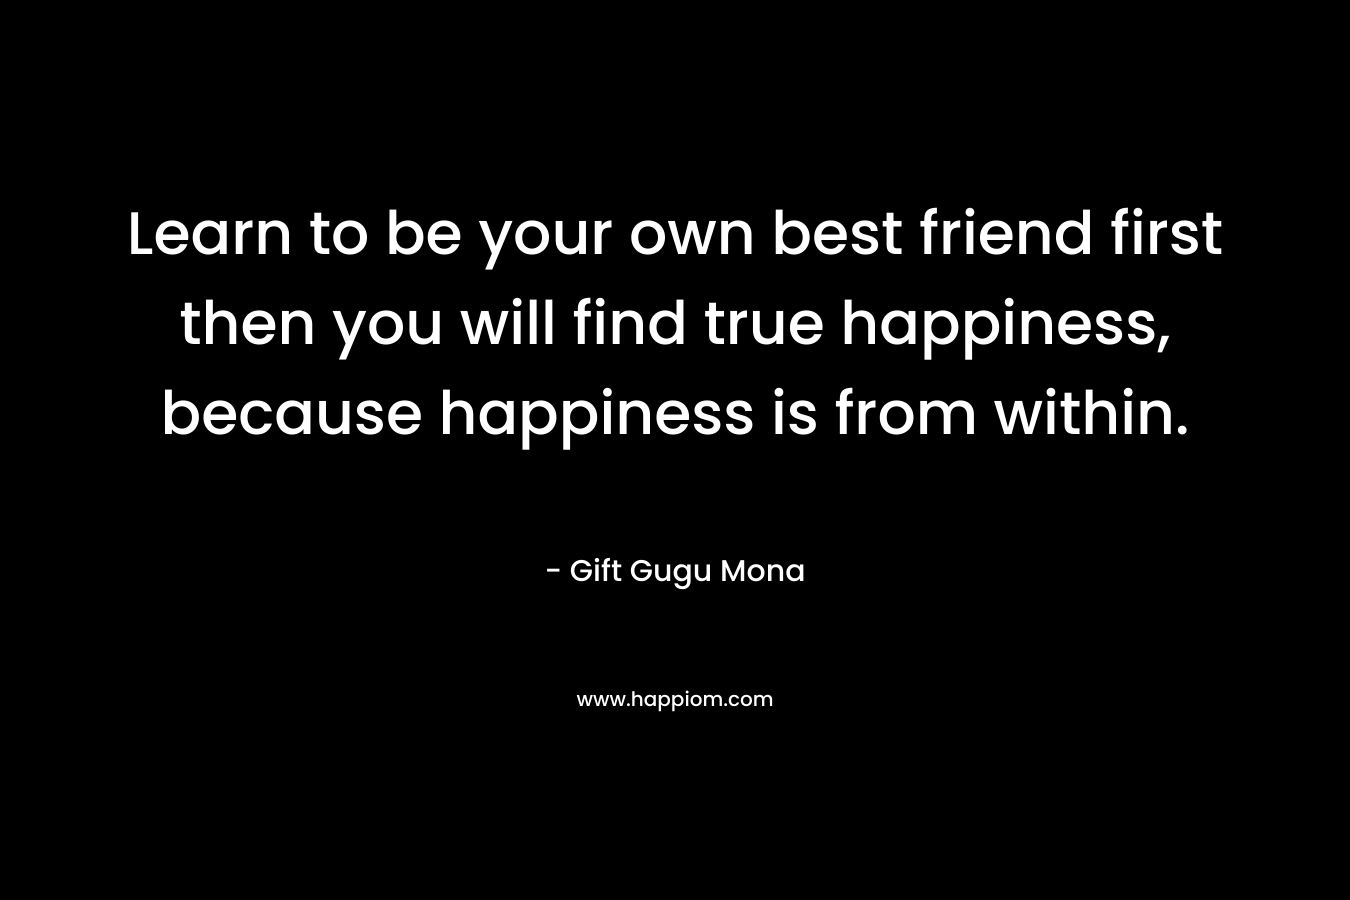 Learn to be your own best friend first then you will find true happiness, because happiness is from within.